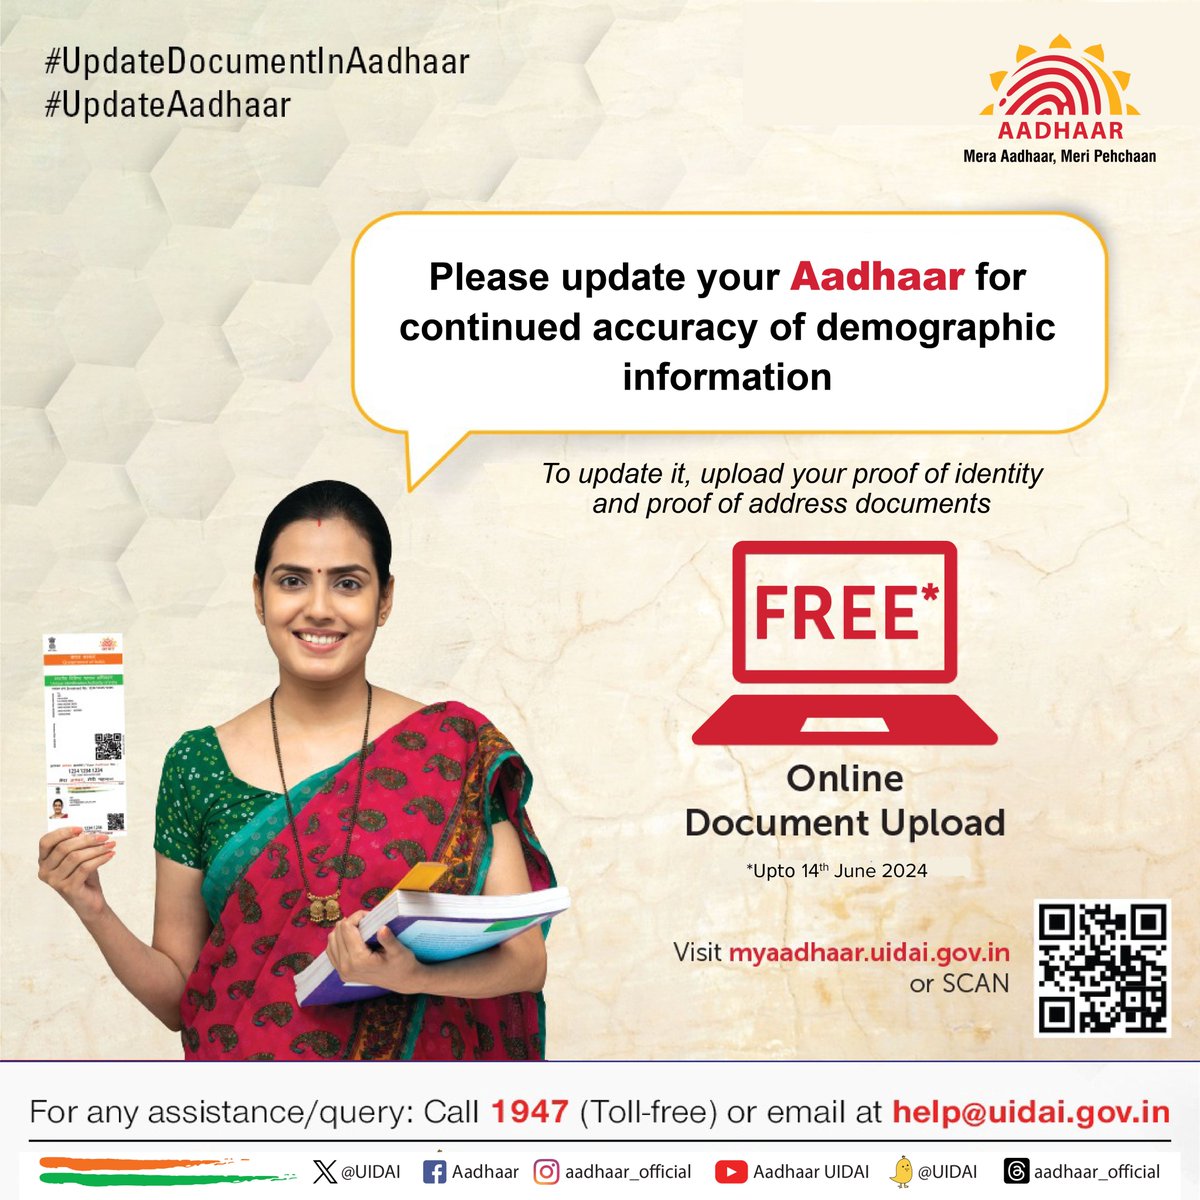 #UIDAI extends free online document upload facility till 14th June 2024; to benefit millions of Aadhaar Number Holders.   
This free service is available only on the #myAadhaar portal. UIDAI has been encouraging people to keep documents updated in their #Aadhaar